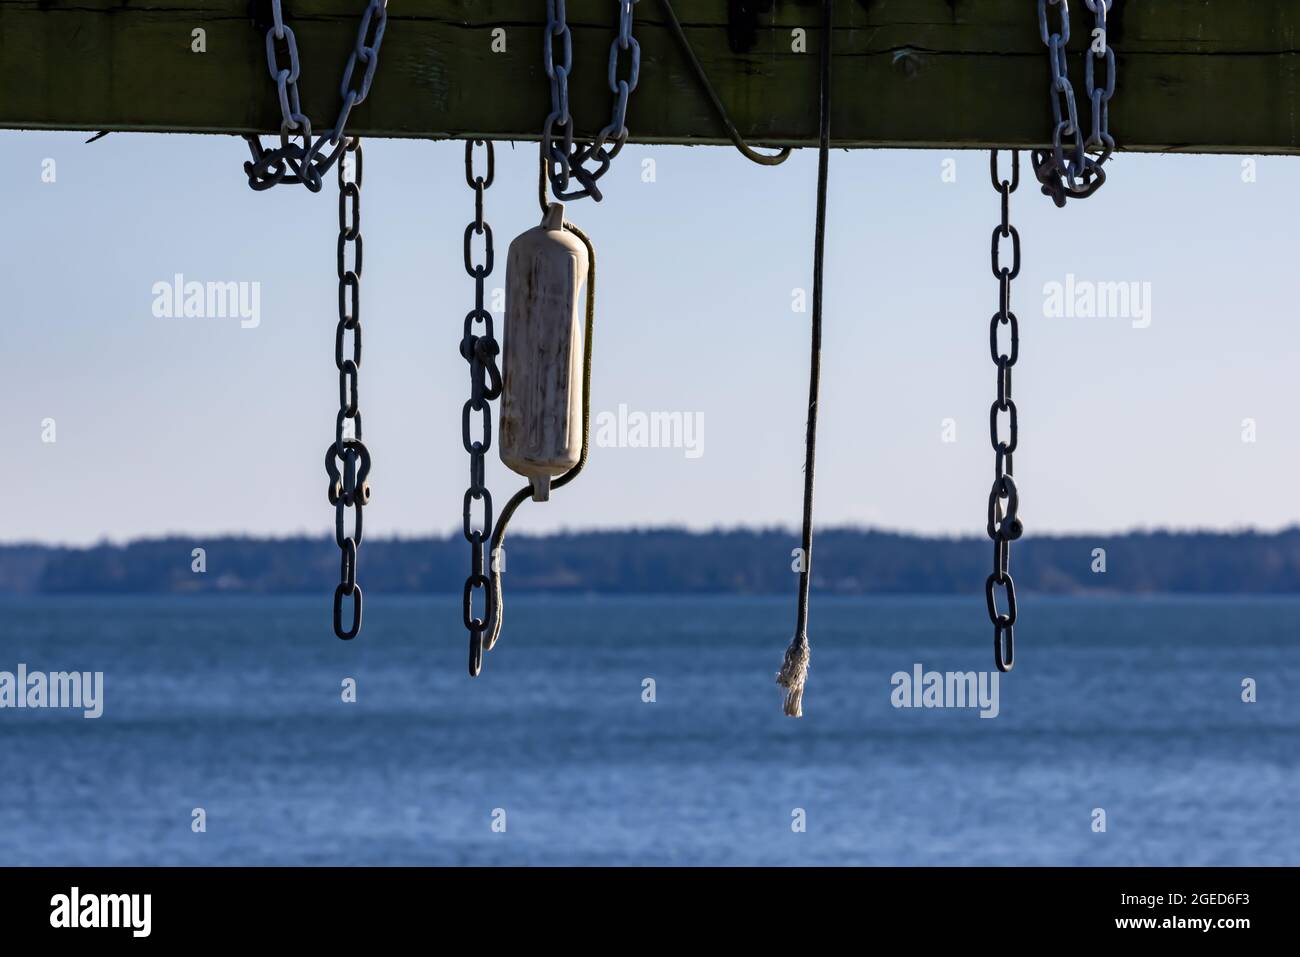 ropes chains and bouys hanging on a wooden beam out on a boat